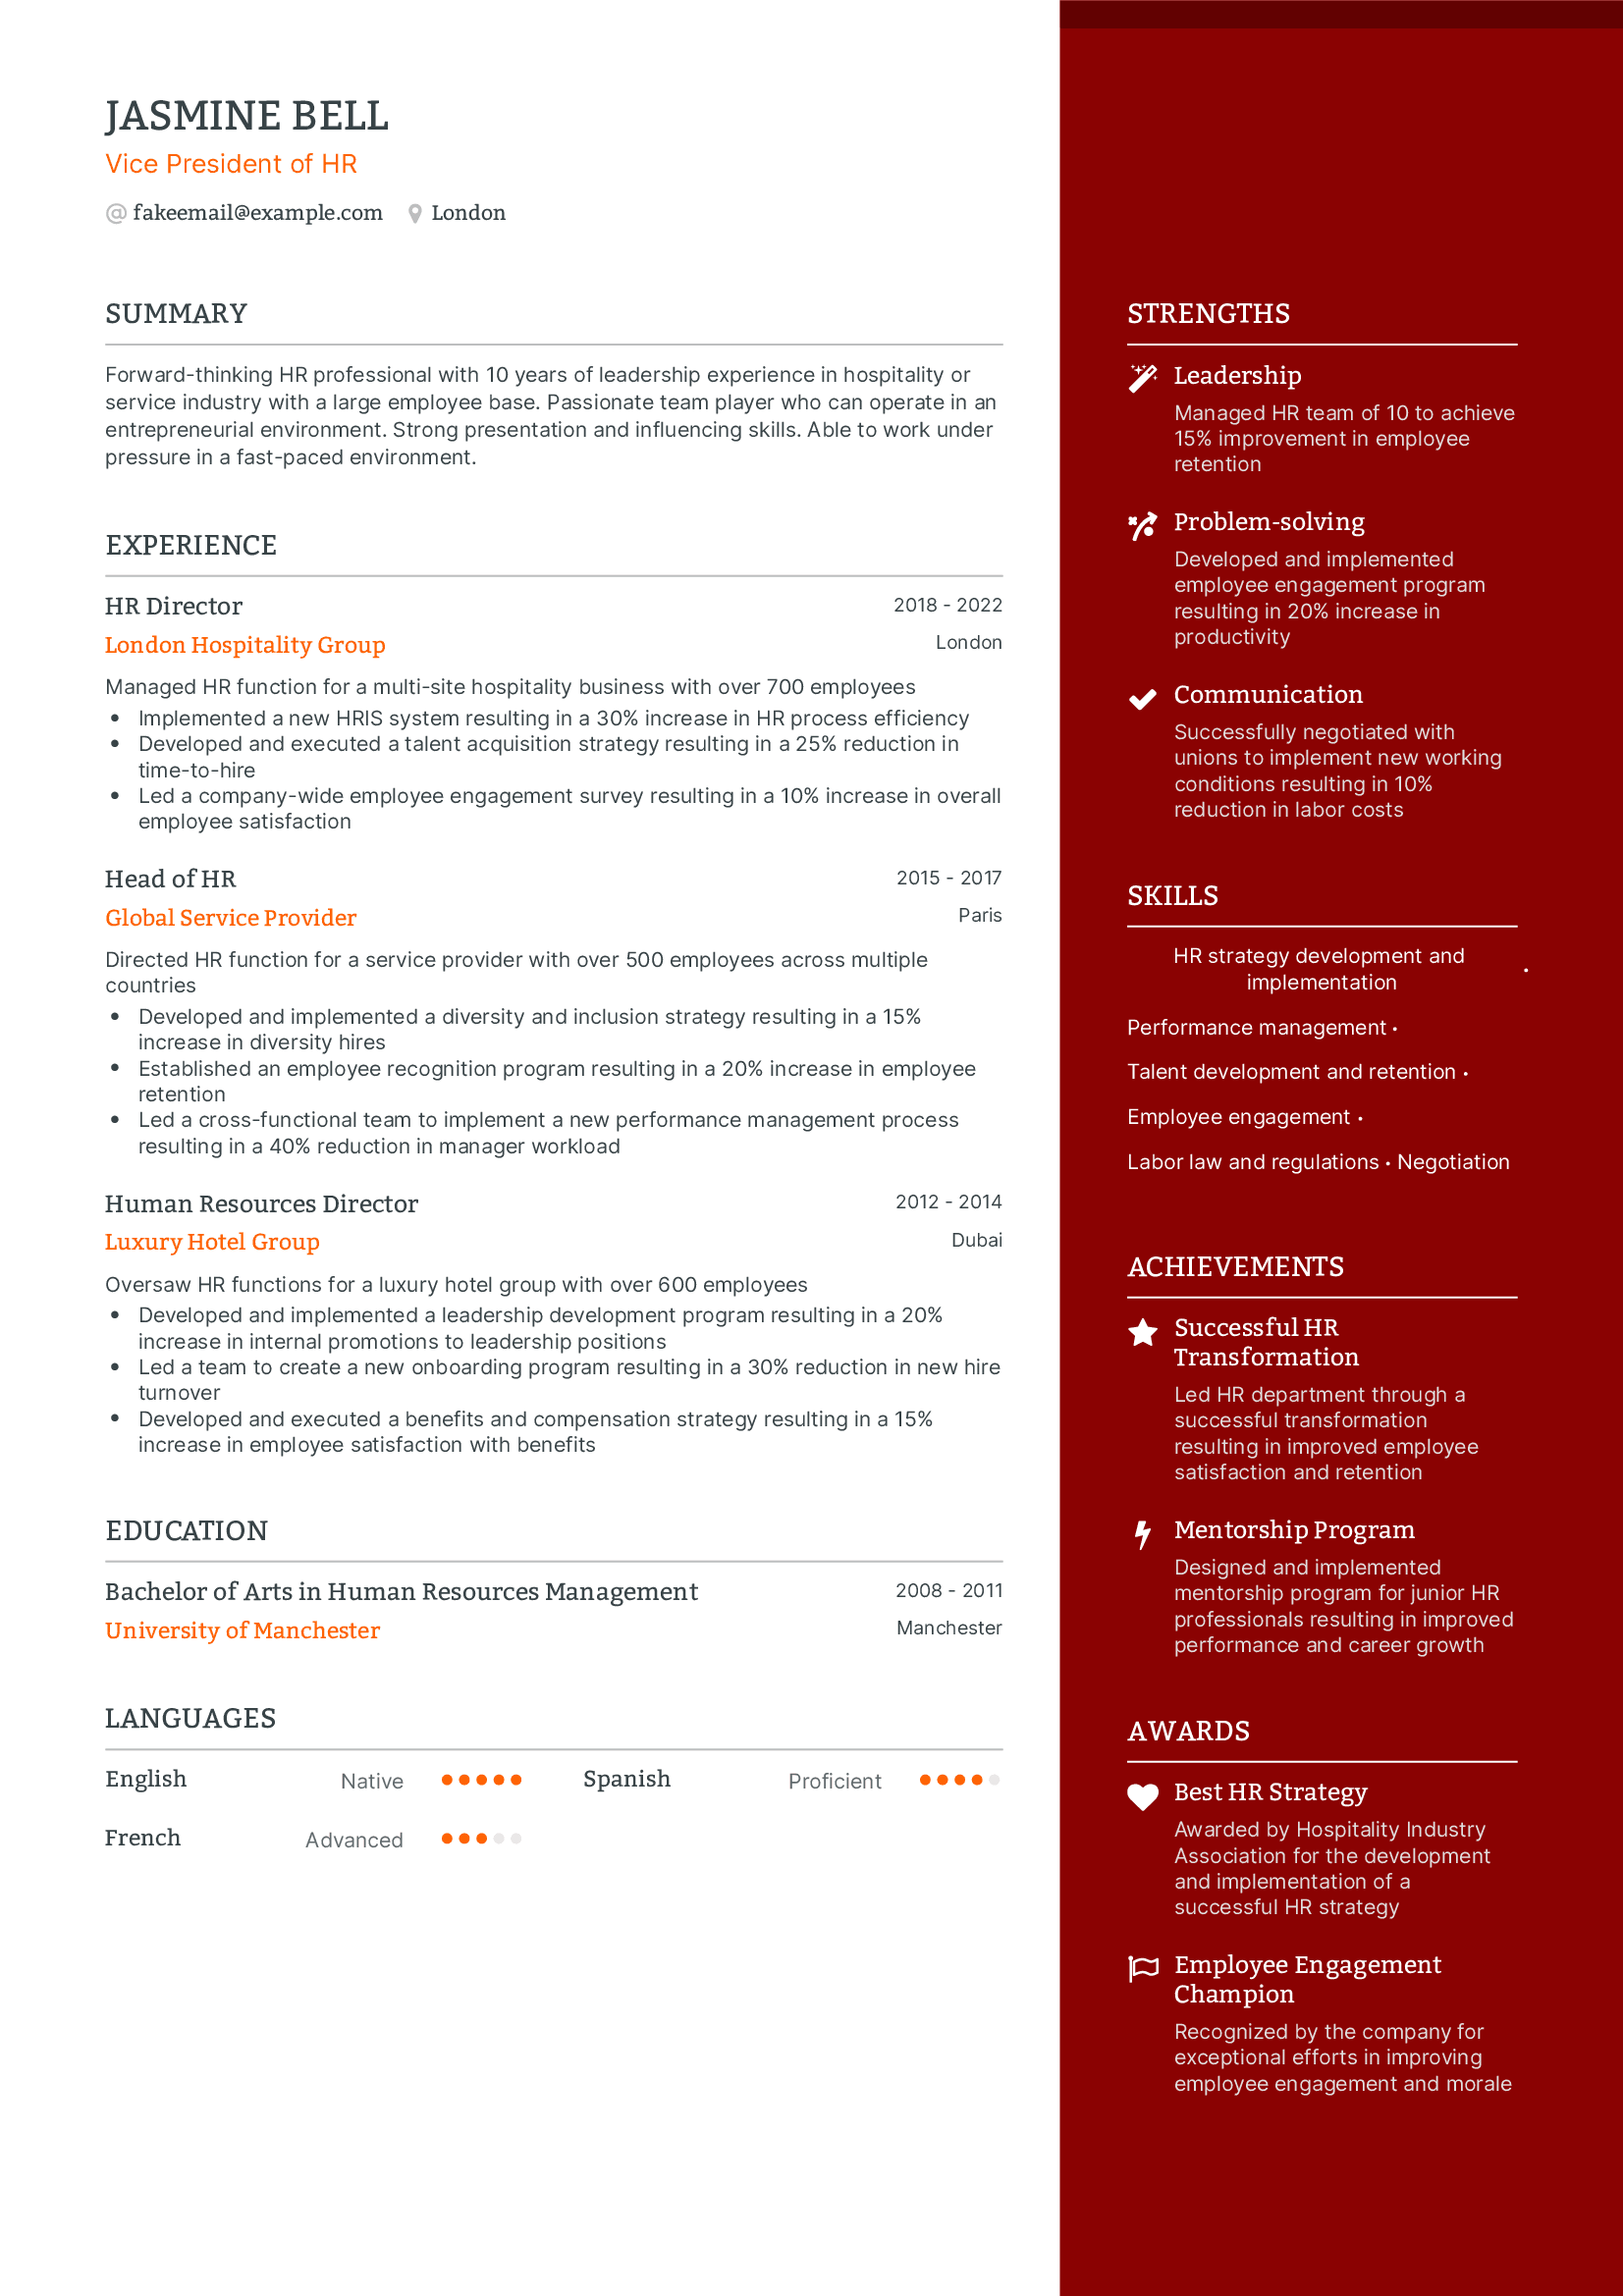 Vice President of HR resume example